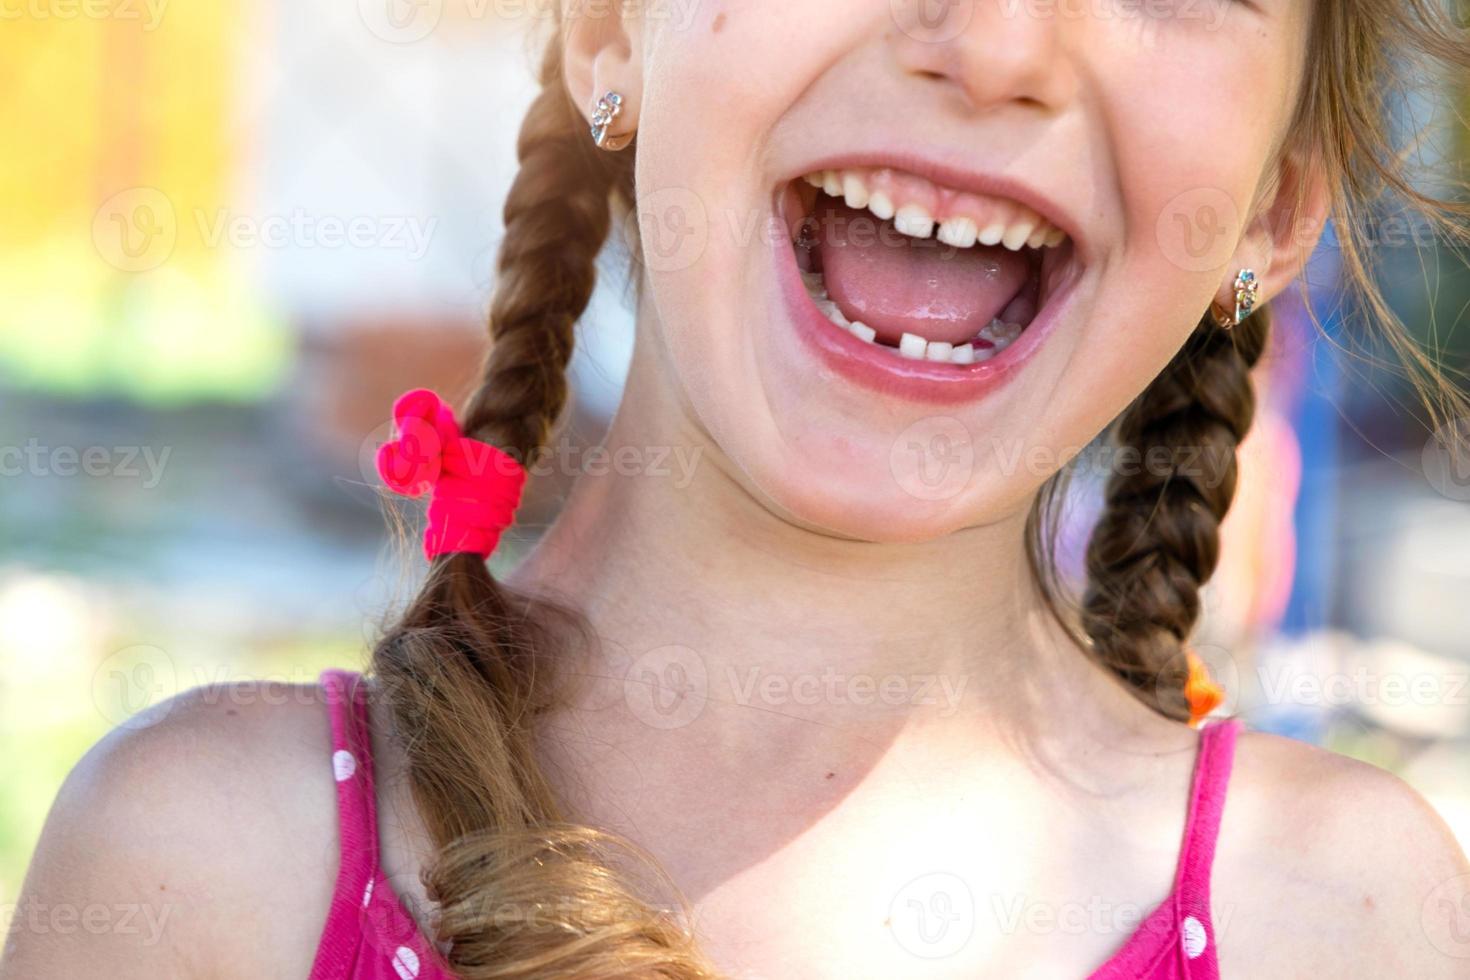 Toothless happy smile of a girl with a fallen lower milk tooth close-up. Changing teeth to molars in childhood photo